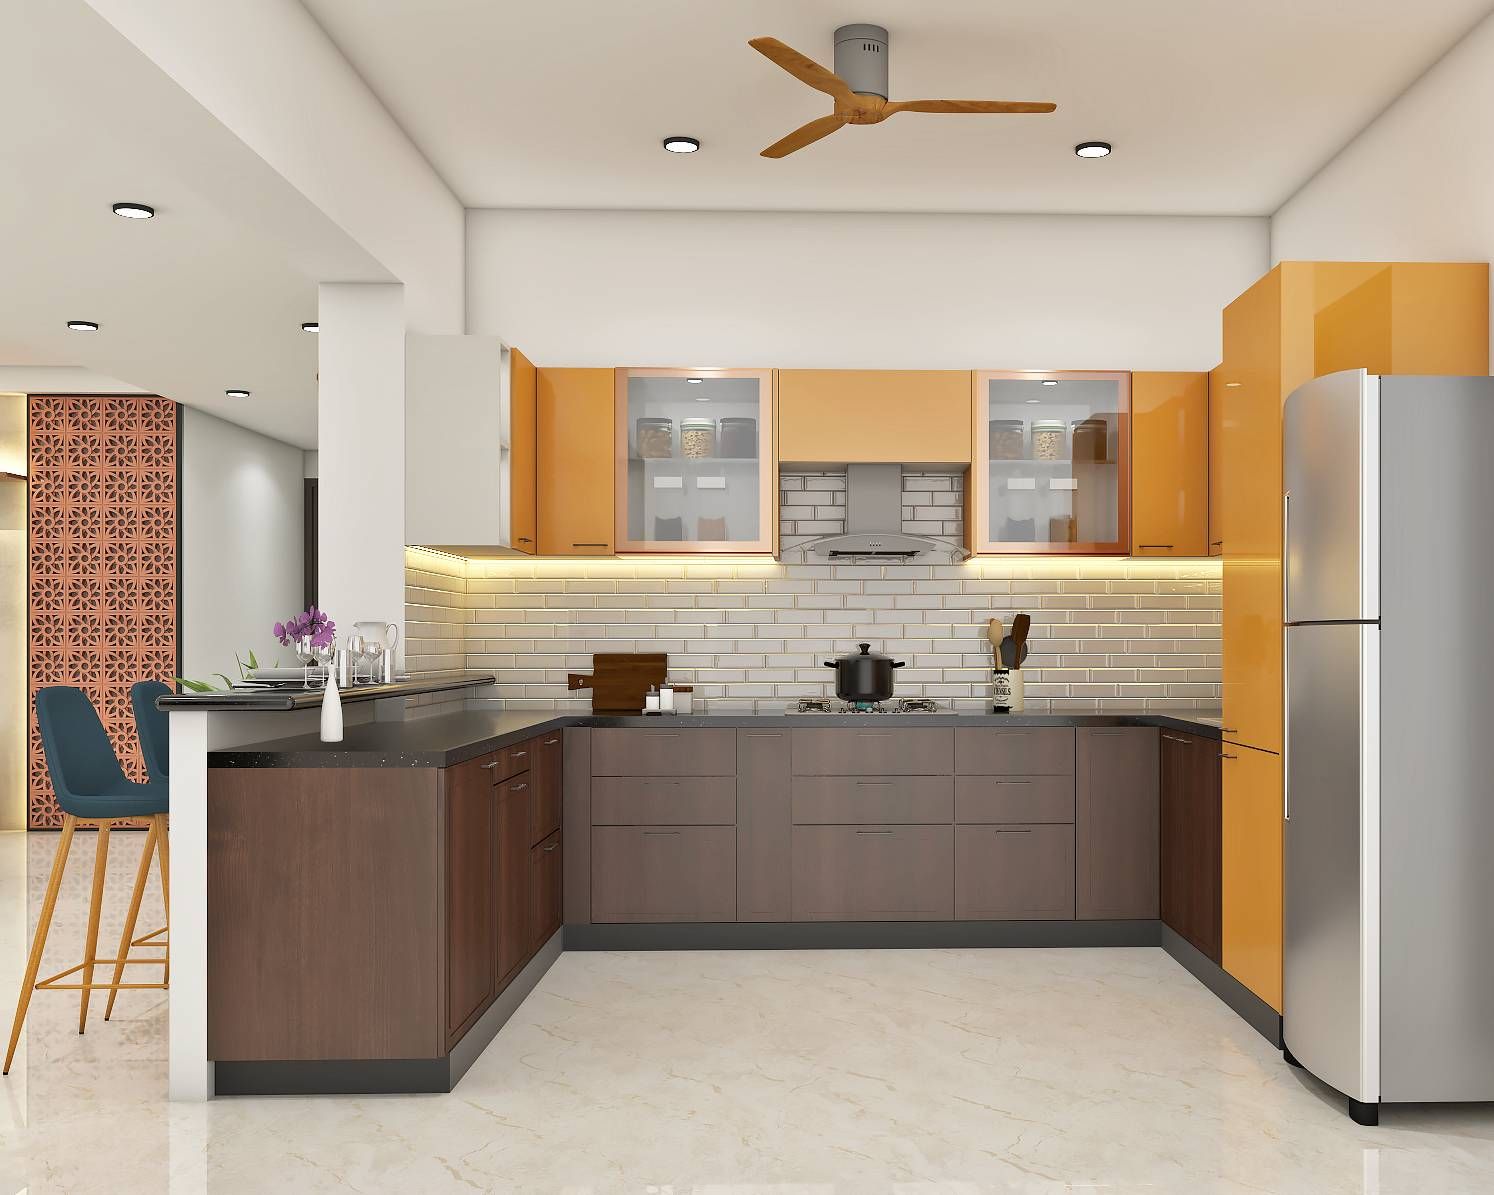 Modern U-Shaped Modular Kitchen Design With Brown And Yellow Cabinets